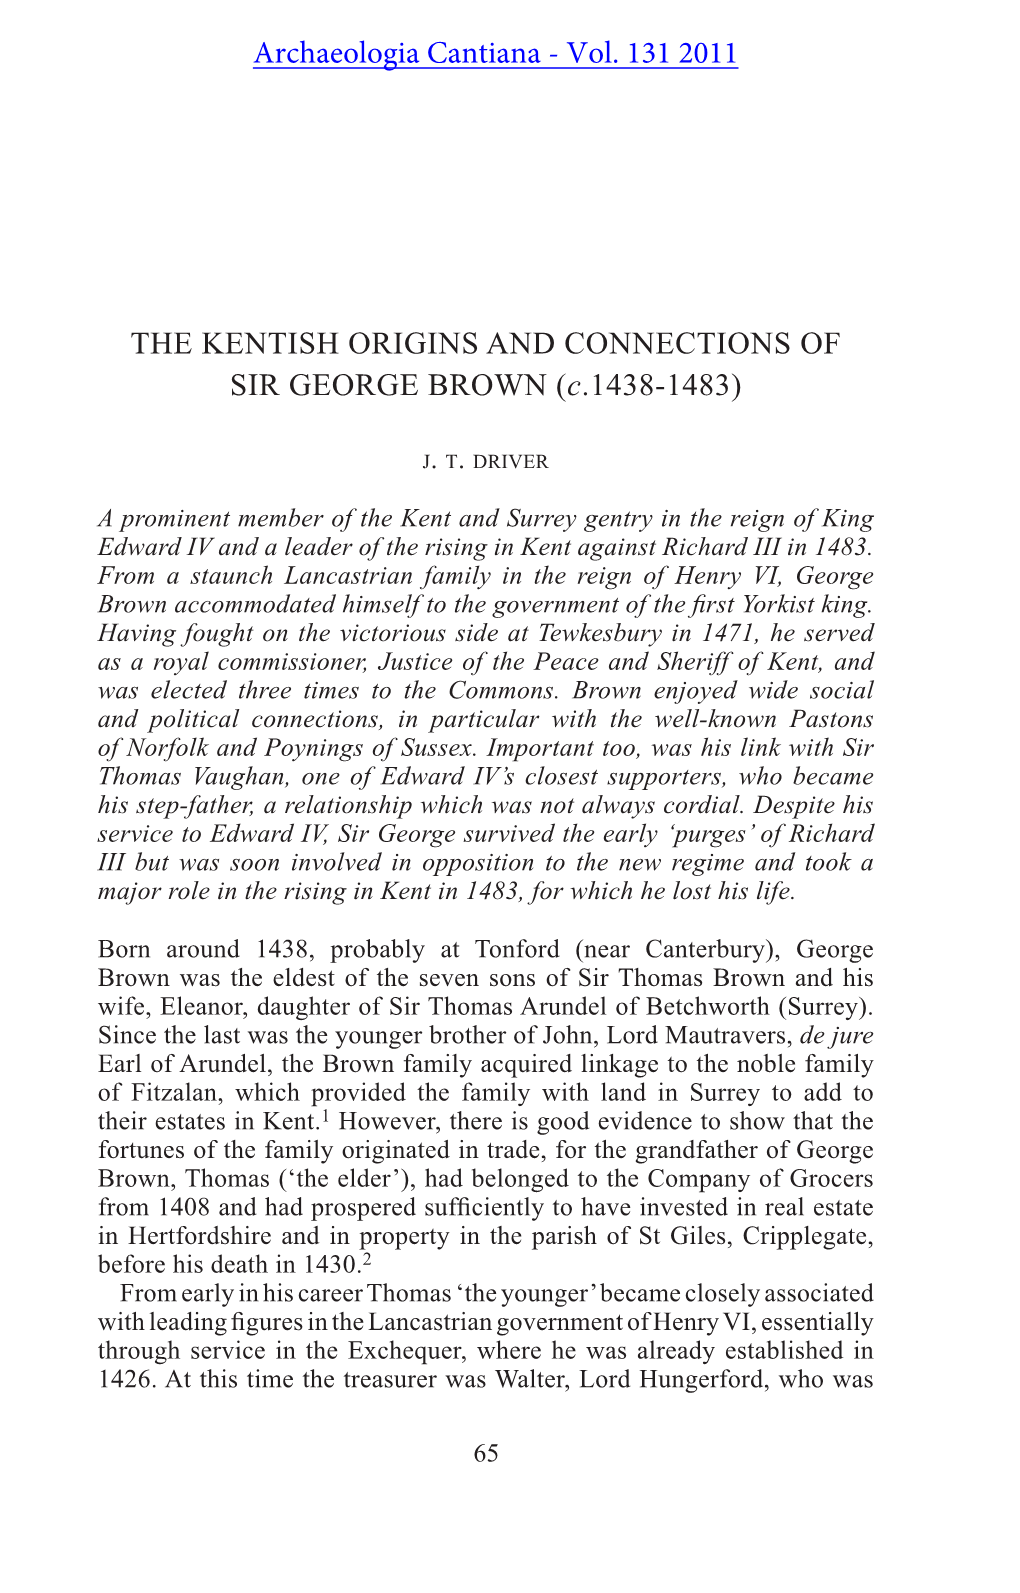 THE KENTISH ORIGINS and CONNECTIONS of SIR GEORGE BROWN (C.1438-1483)